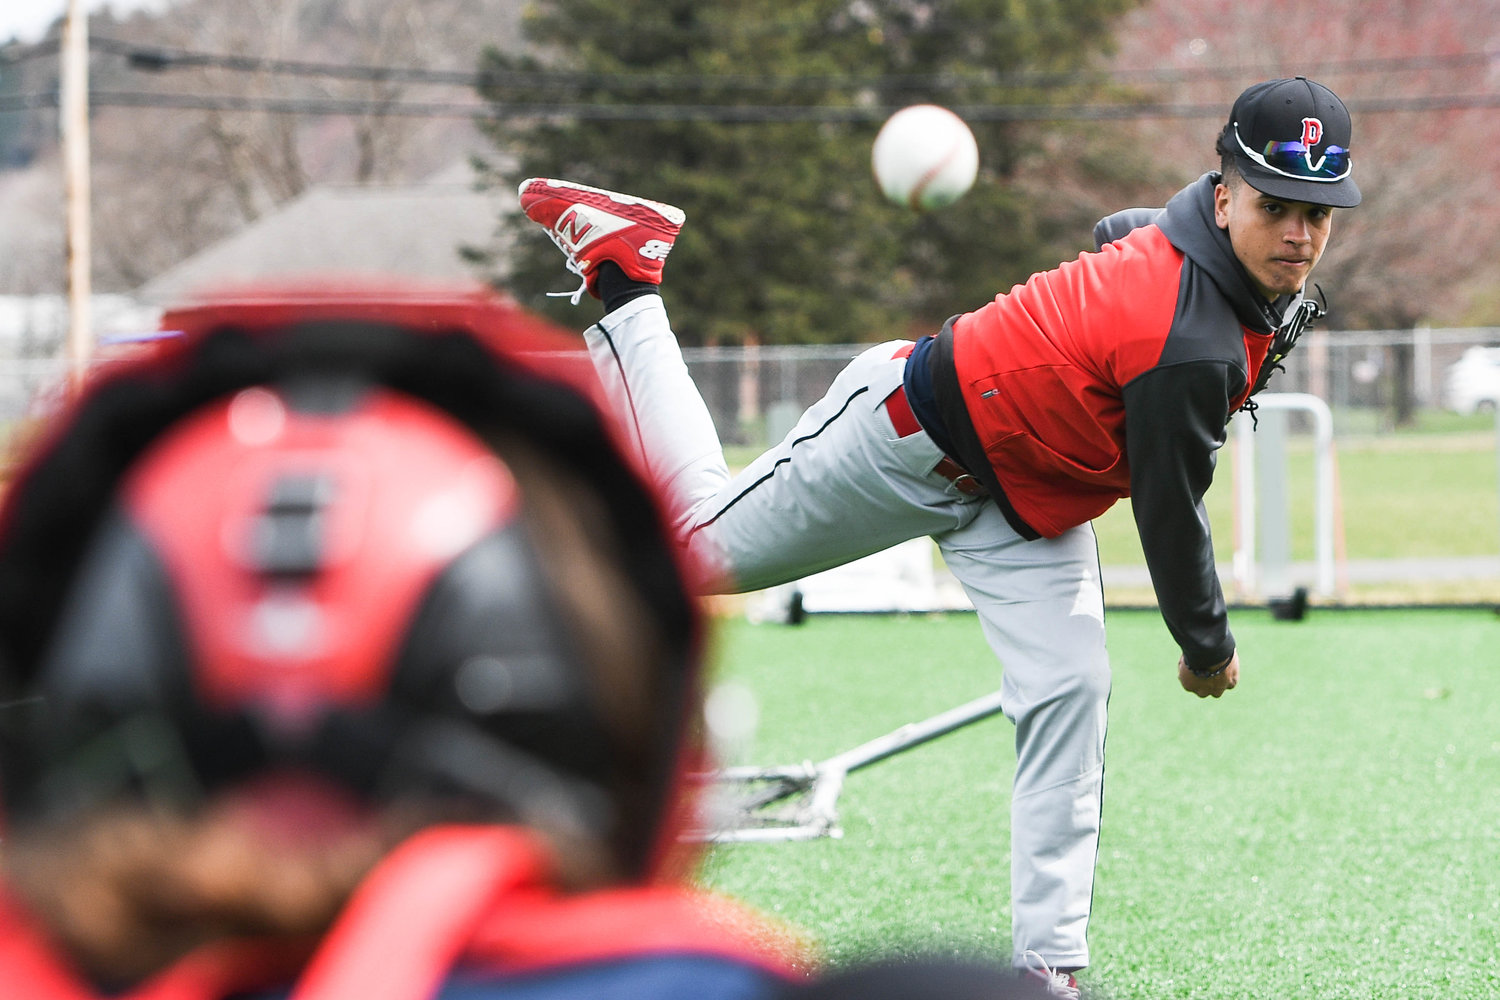 LOOKING IN — Proctor pitcher Manny Baez warms up his arm during practice on Monday at the high school in Utica. He’s considered a key pitcher and outfielder for Proctor, according to coach Dave Guido.